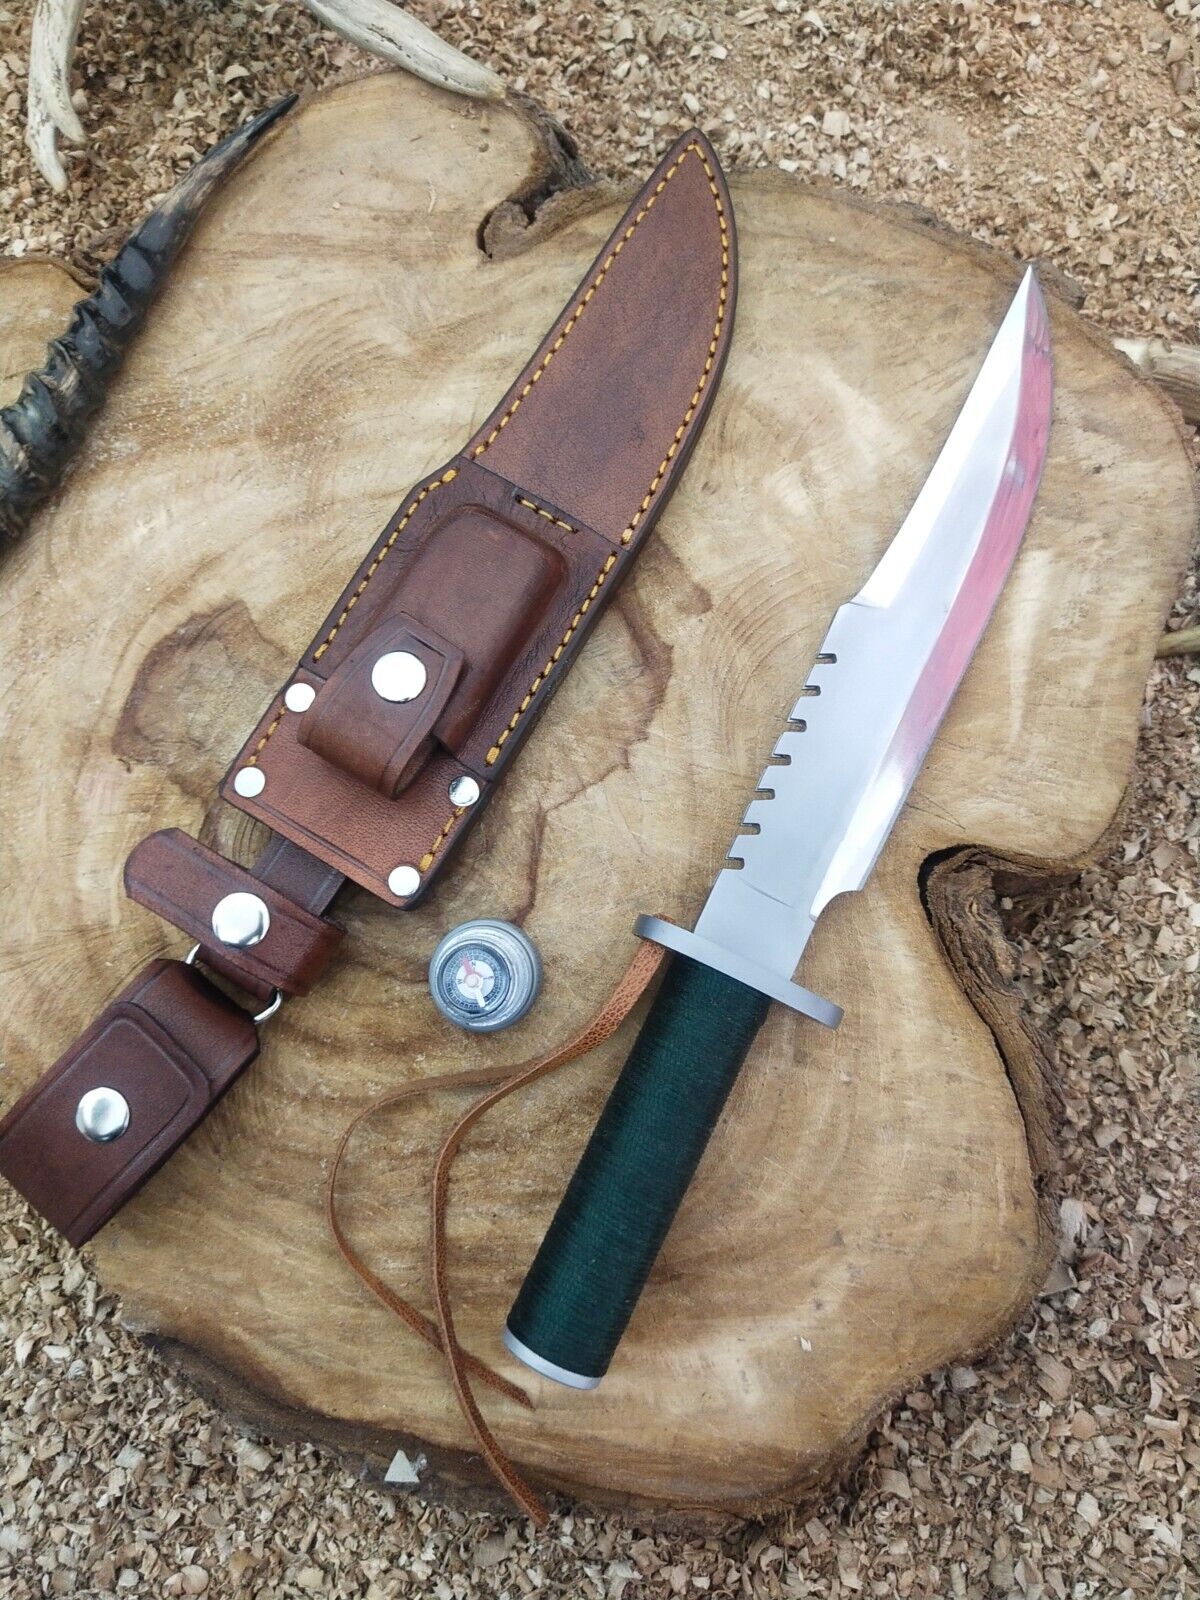 New Style Rambo Hunting Knife Premium Quality Survival Tool 440c stainless steel